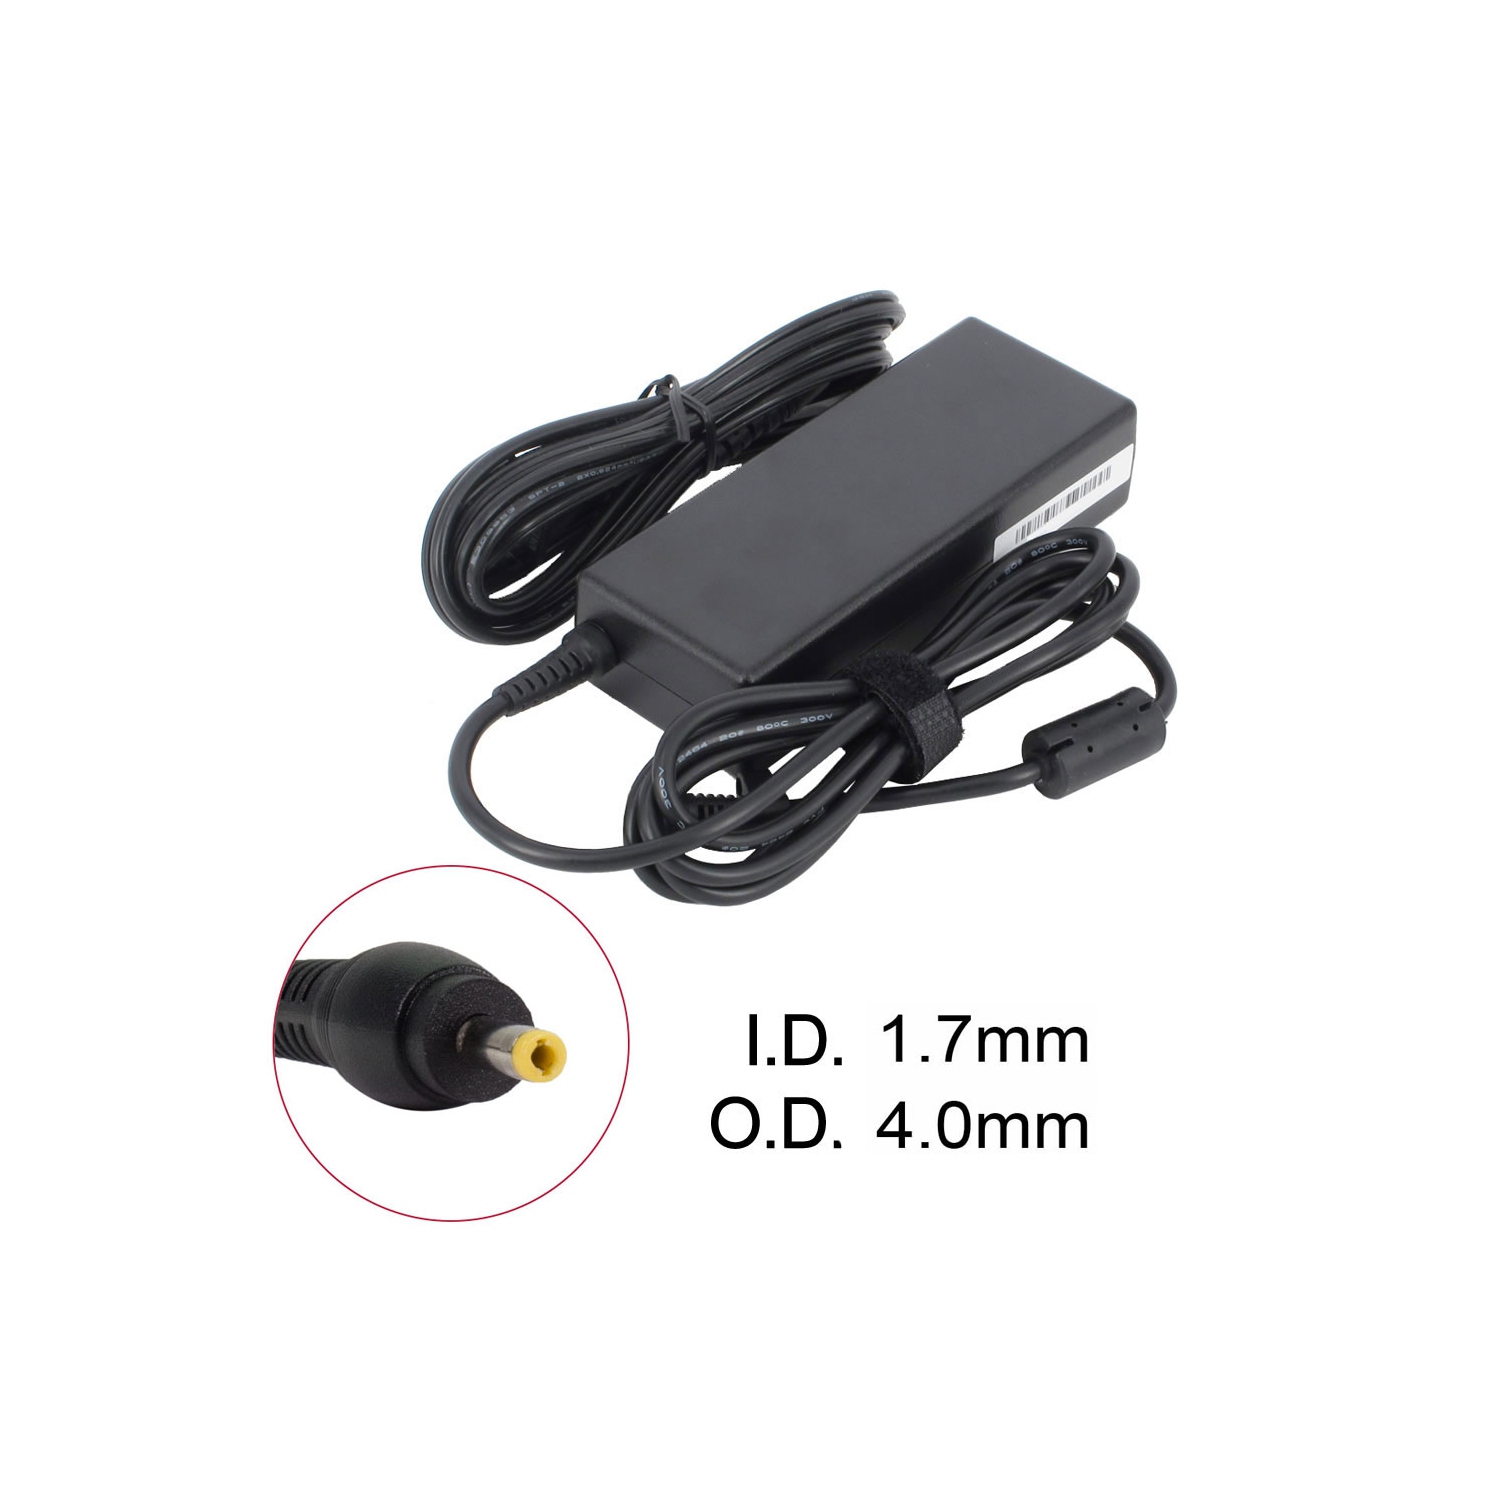 BATTDEPOT NEW Lenovo IdeaPad 310 65W-90W 20V 3.25A-4.5A max Laptop AC Adapter Charger